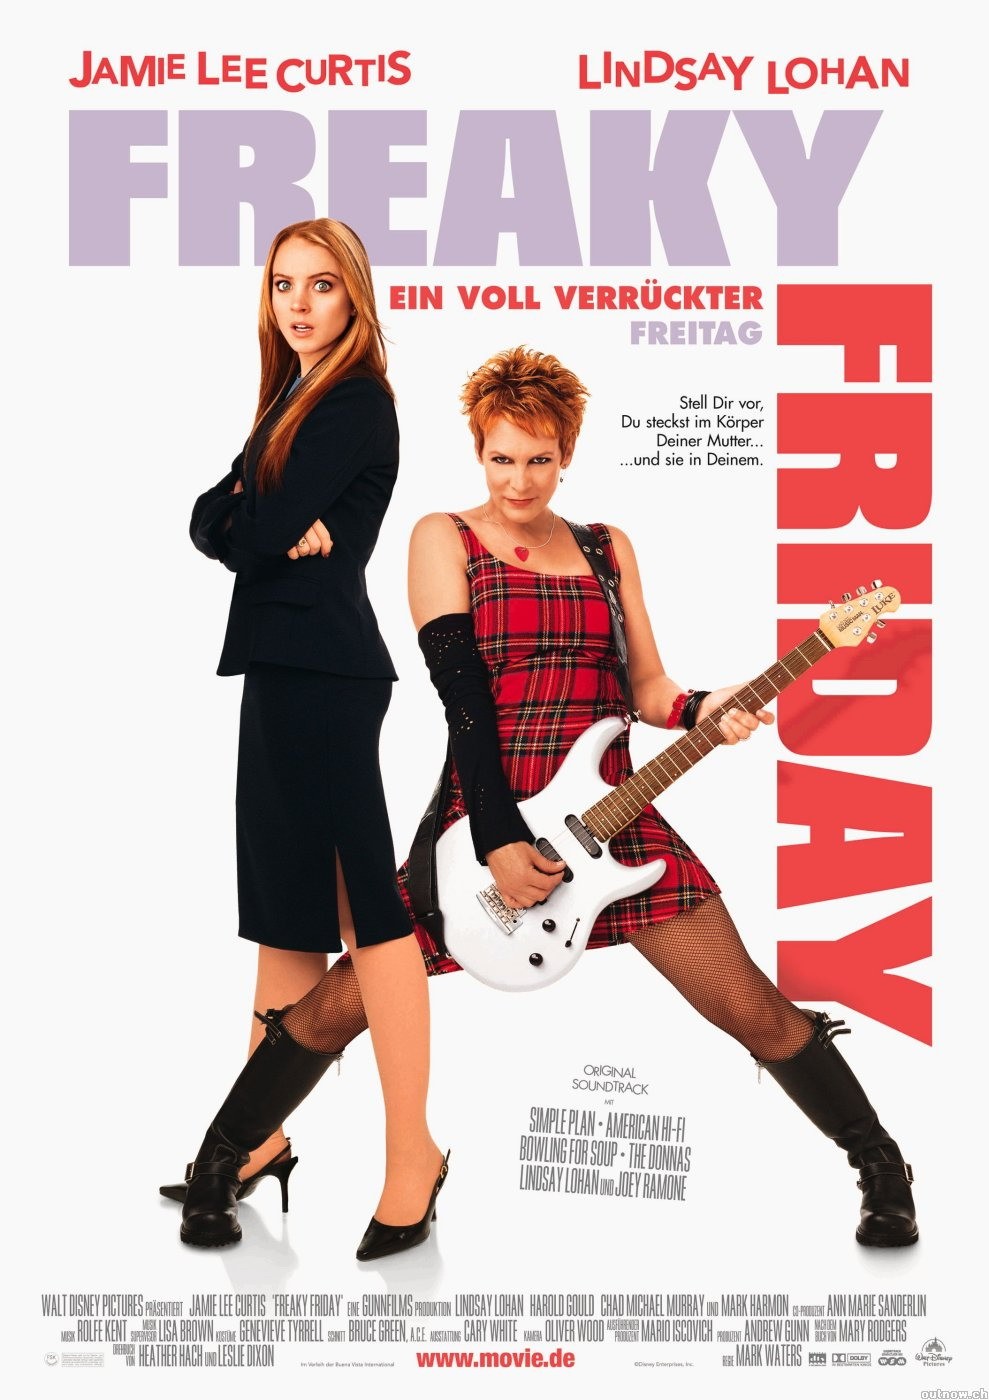 Extra Large Movie Poster Image for Freaky Friday (#2 of 4)